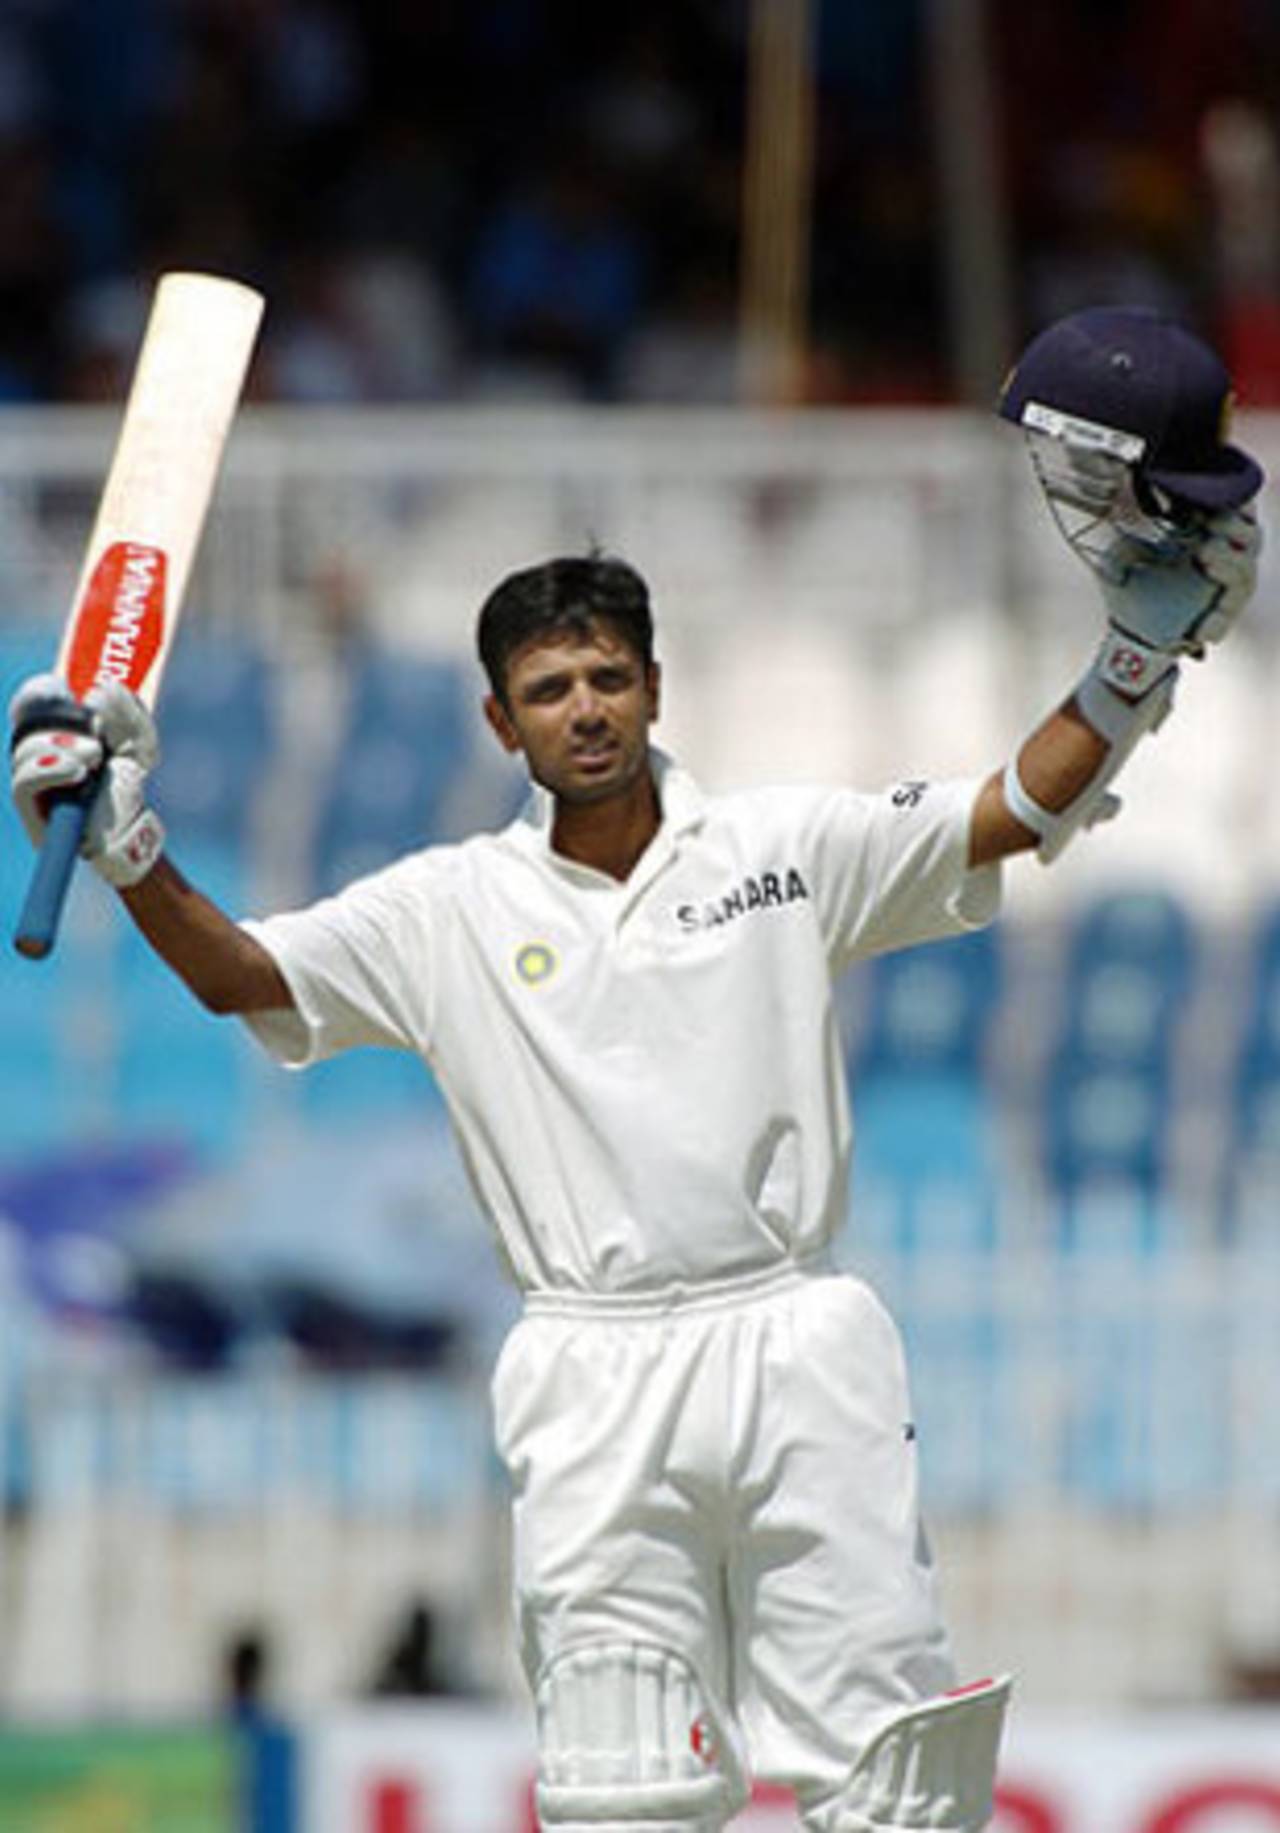 Rahul Dravid gets to his double-hundred, and looks good for more, Pakistan v India, 3rd Test, Rawalpindi, 3rd day, April 15, 2004